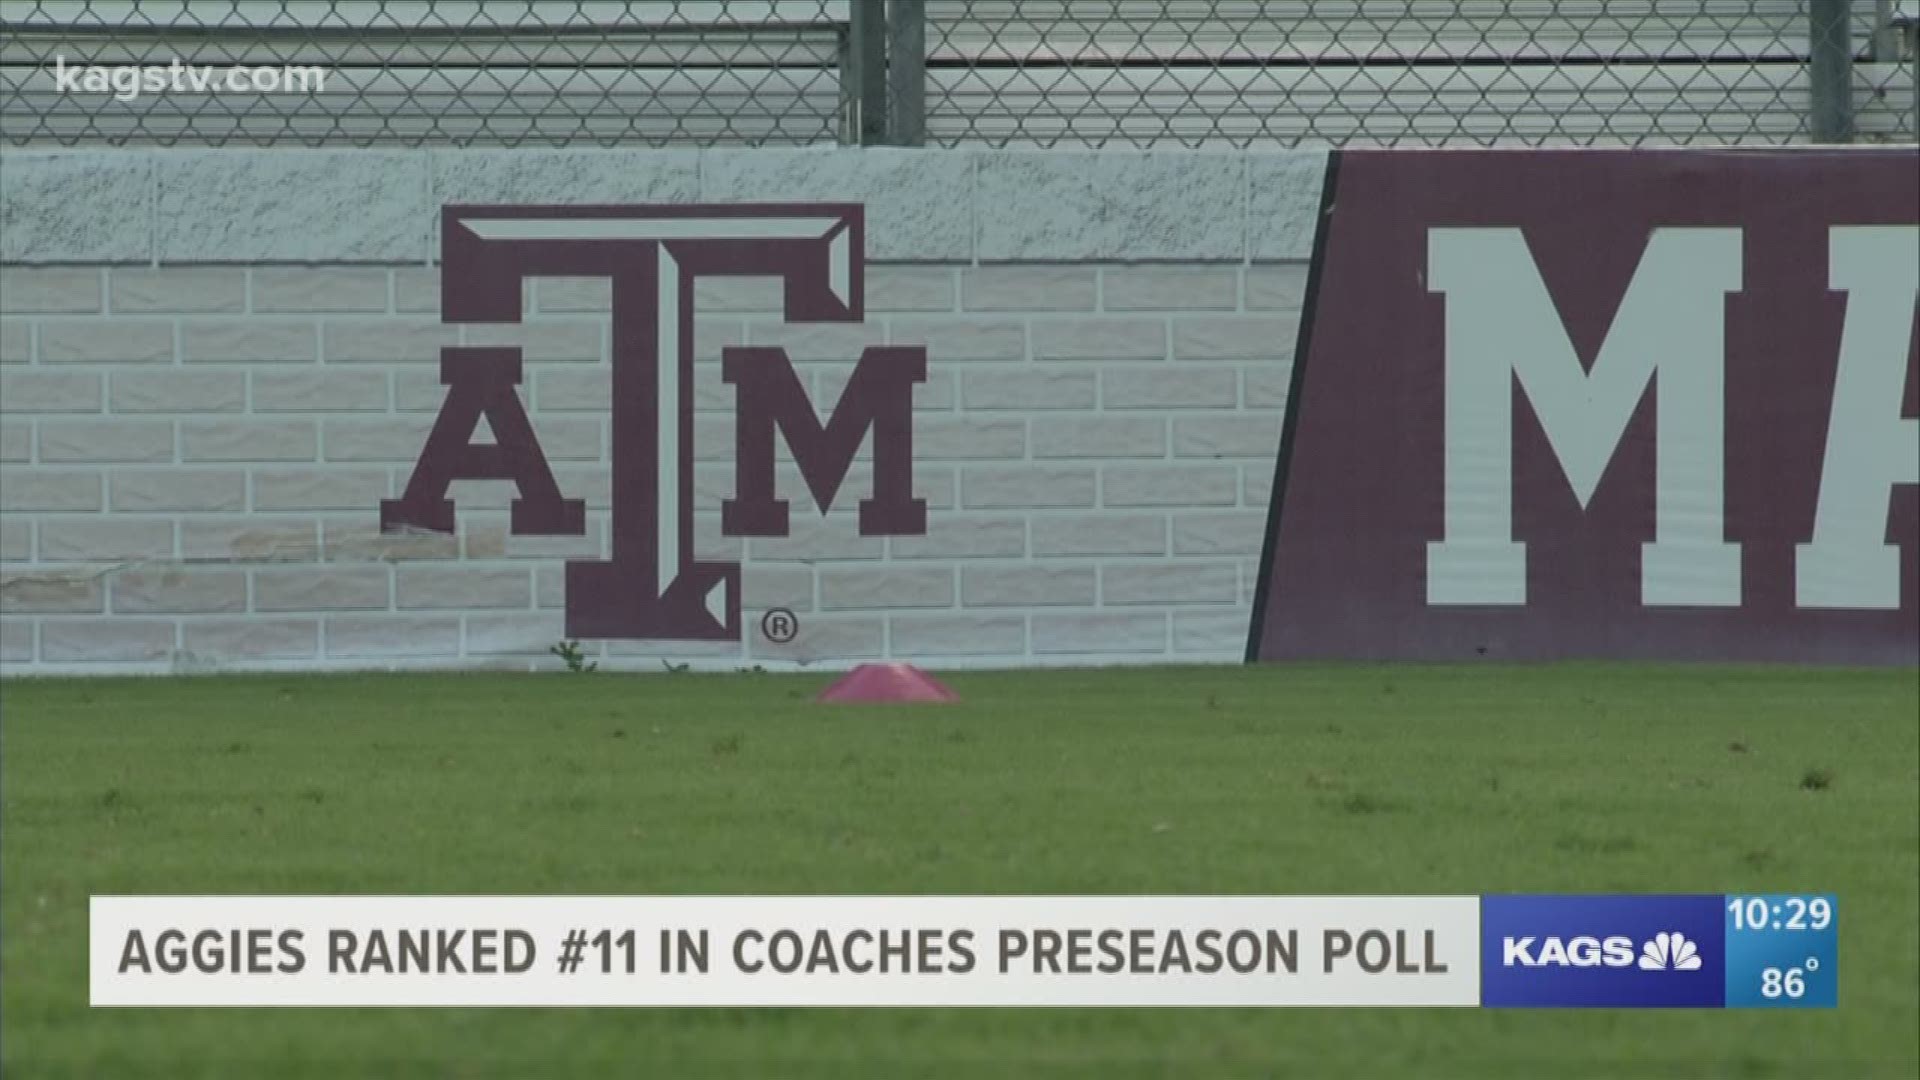 The Texas A&M soccer team will enter the season ranked number 11 in the coaches poll.